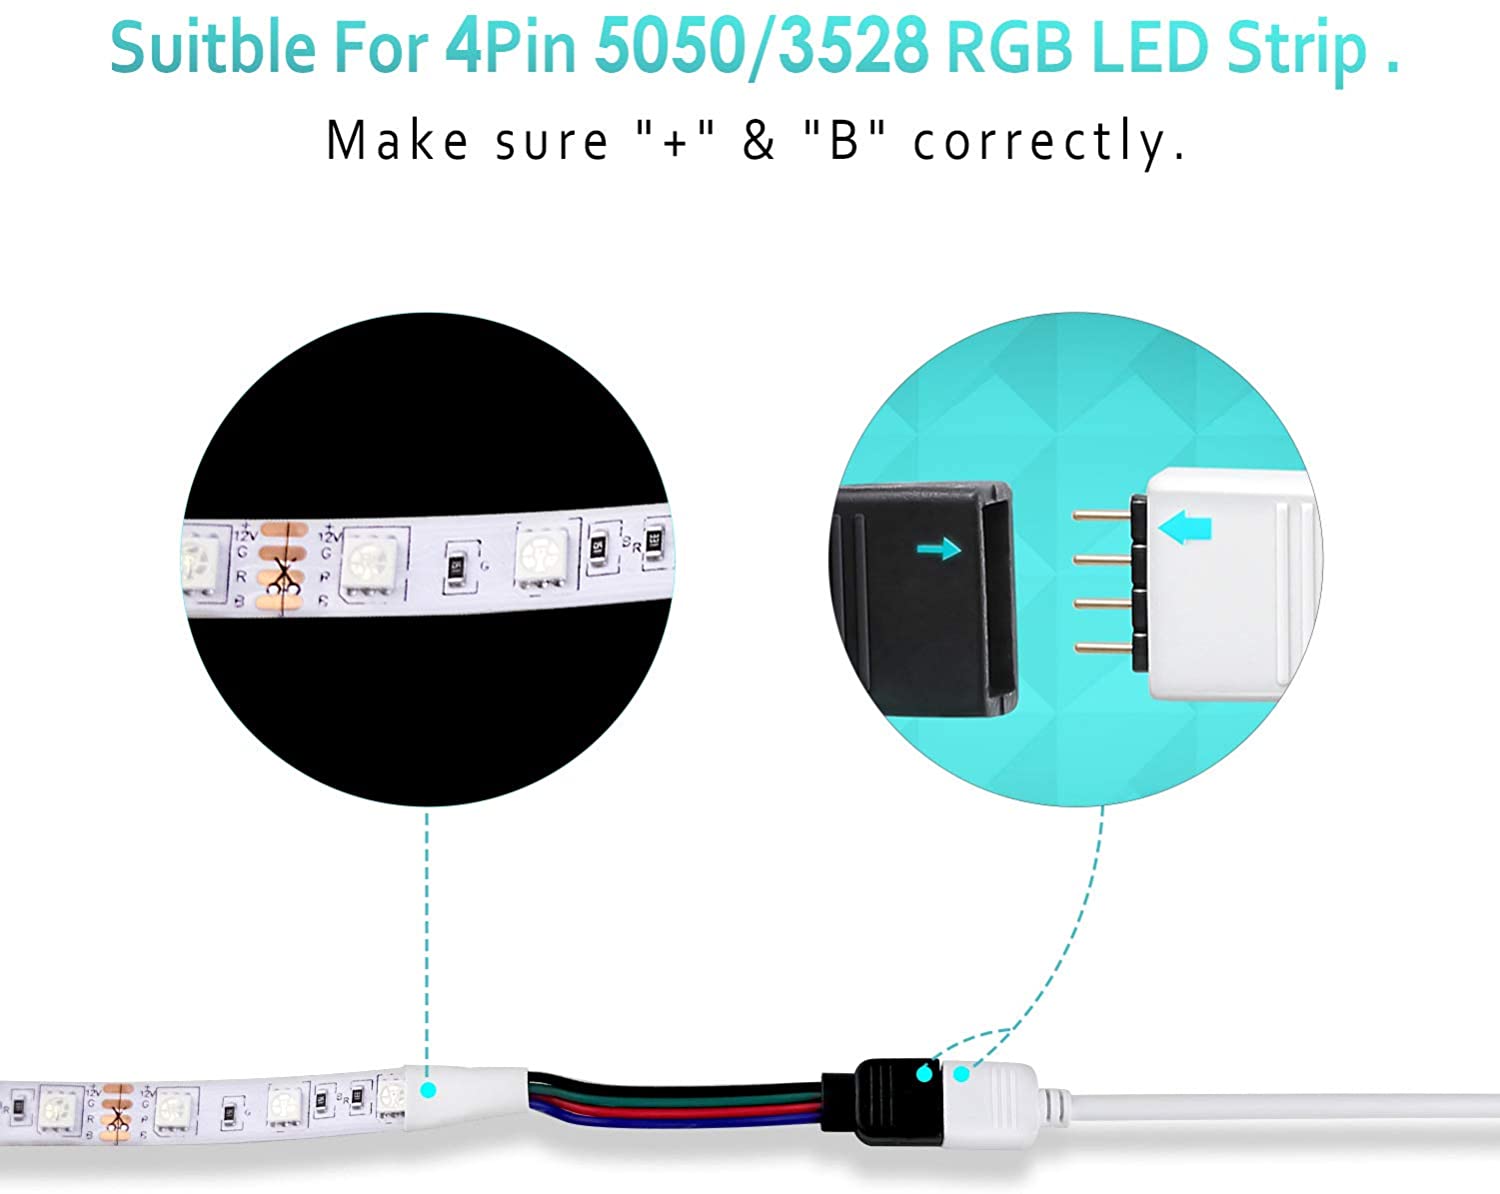 2 Metre DC 12V/24V RGB LED Strip Extension Cable LED Strip Connector 4 Pin Soldless Strip Jumper Cables Kit with Connector for 5050 3528 - ATOM LED